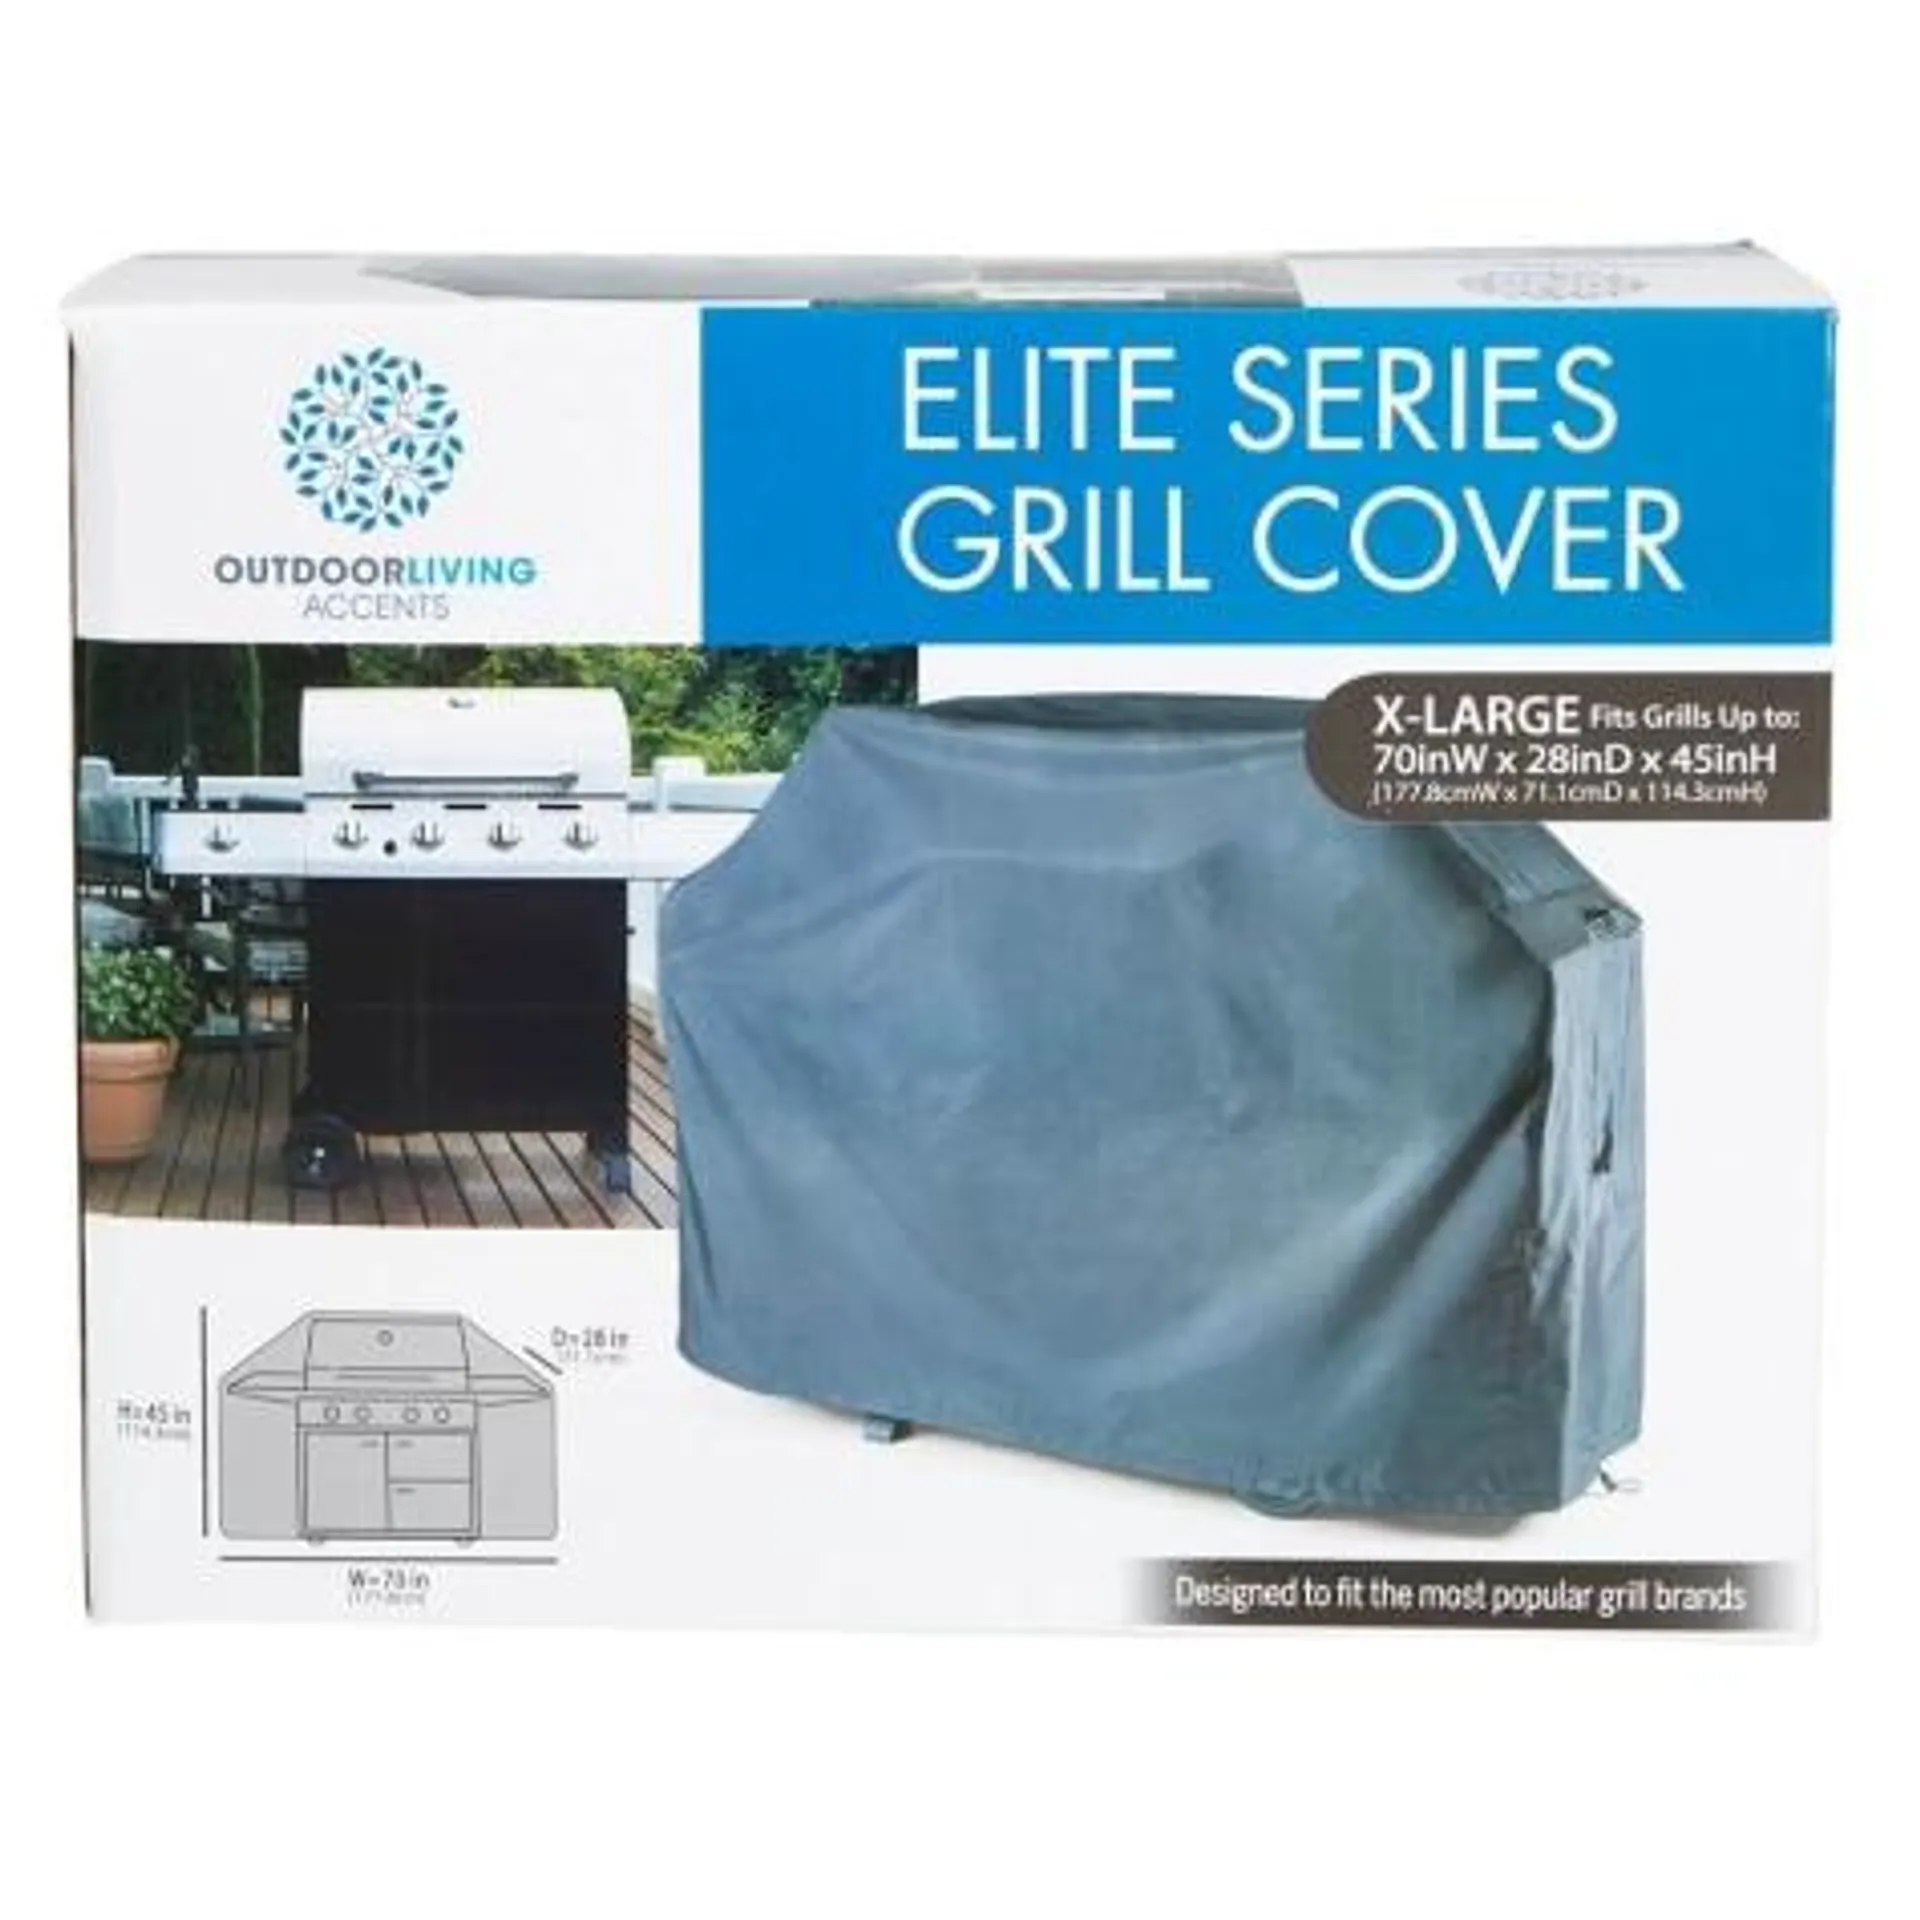 Outdoor Living Accents Elite Series Grill Cover - X-Large